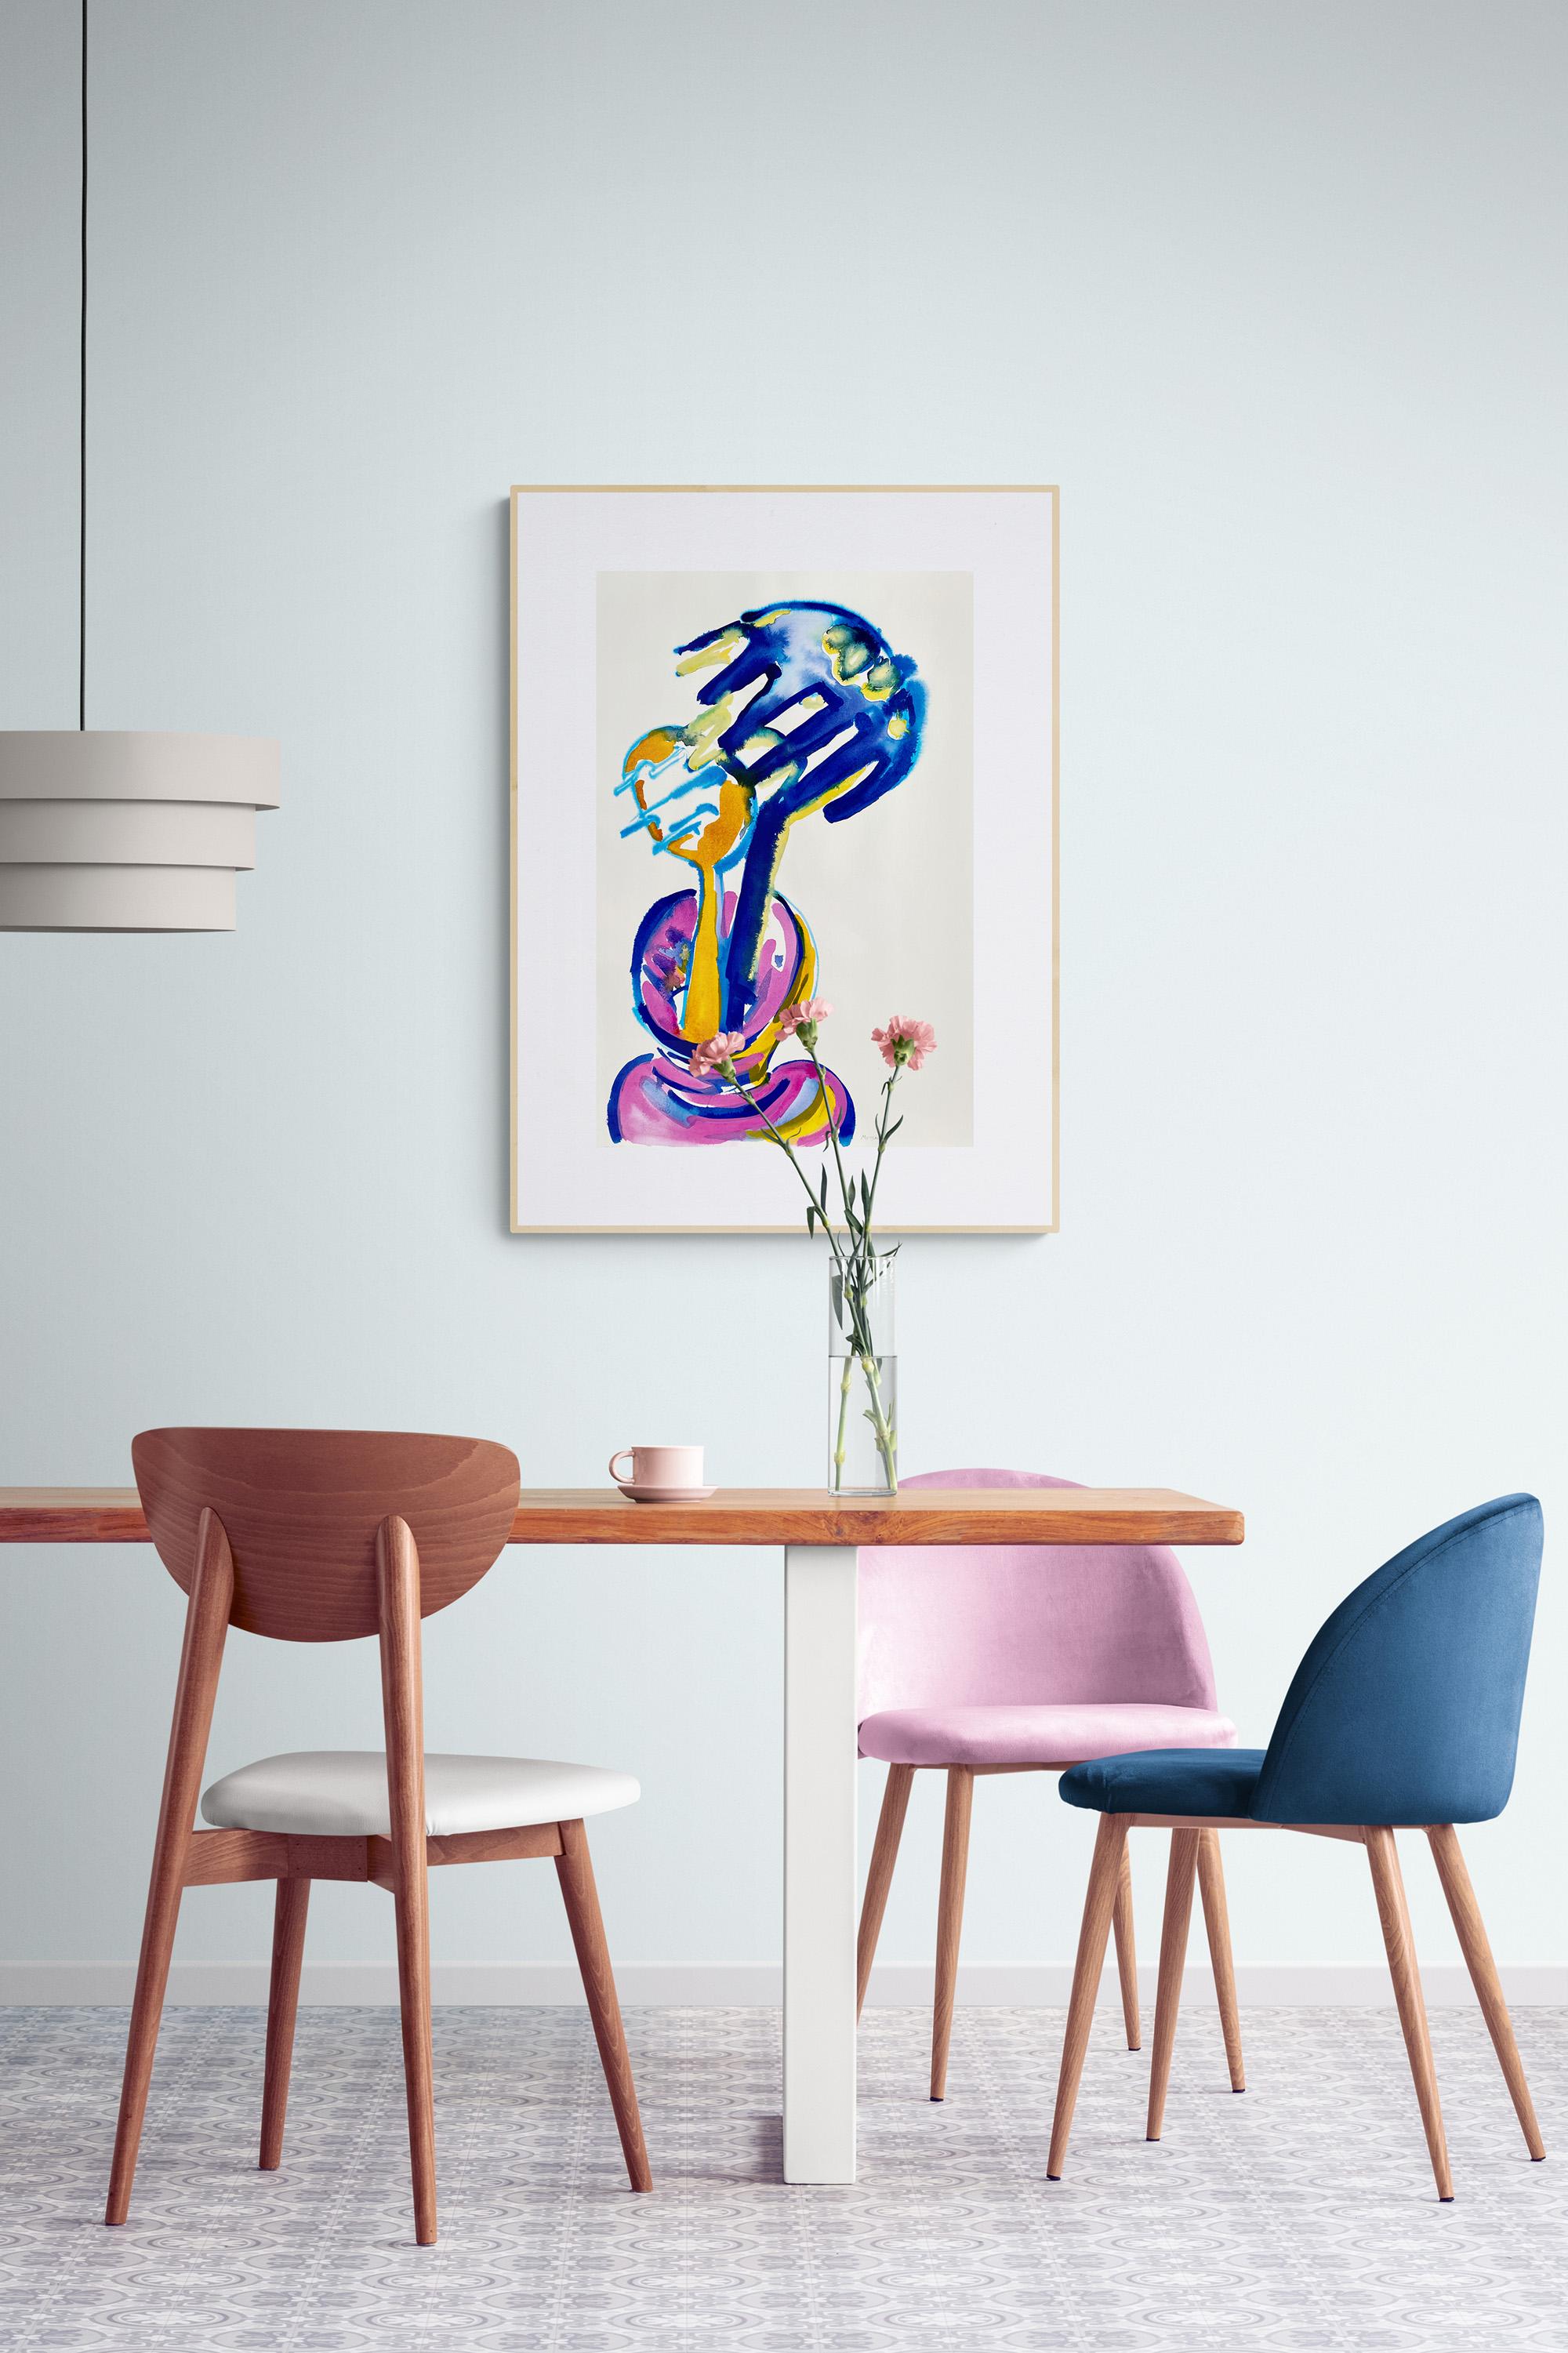 Monica DeSalvo’s “Two Spaghetti Spoons'' is a 28 x 20 inch playful acrylic painting on 100% cotton archival printmaking paper with deckled edges. Bold brush strokes of deep blue, ochre and hot pink swirl into a whimsical contour of two pasta